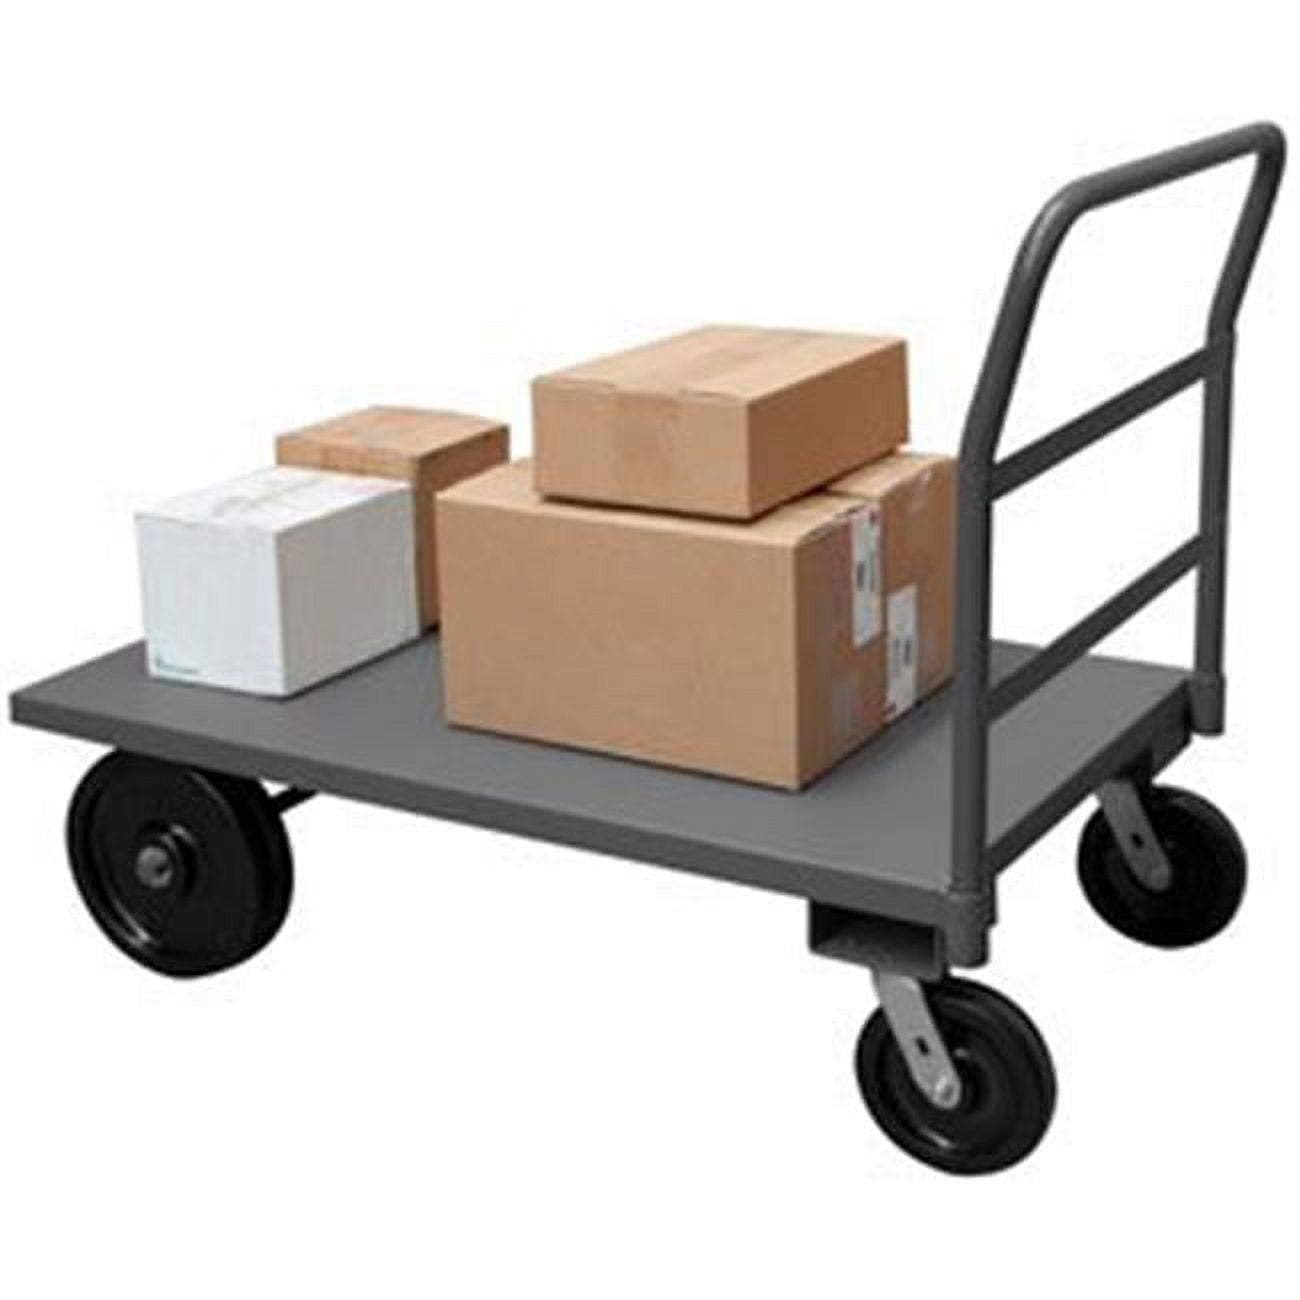 Picture of Durham PT30608-12PH95 41 in. Platform Trucks with Phenolic Casters, Gray - 5000 lbs